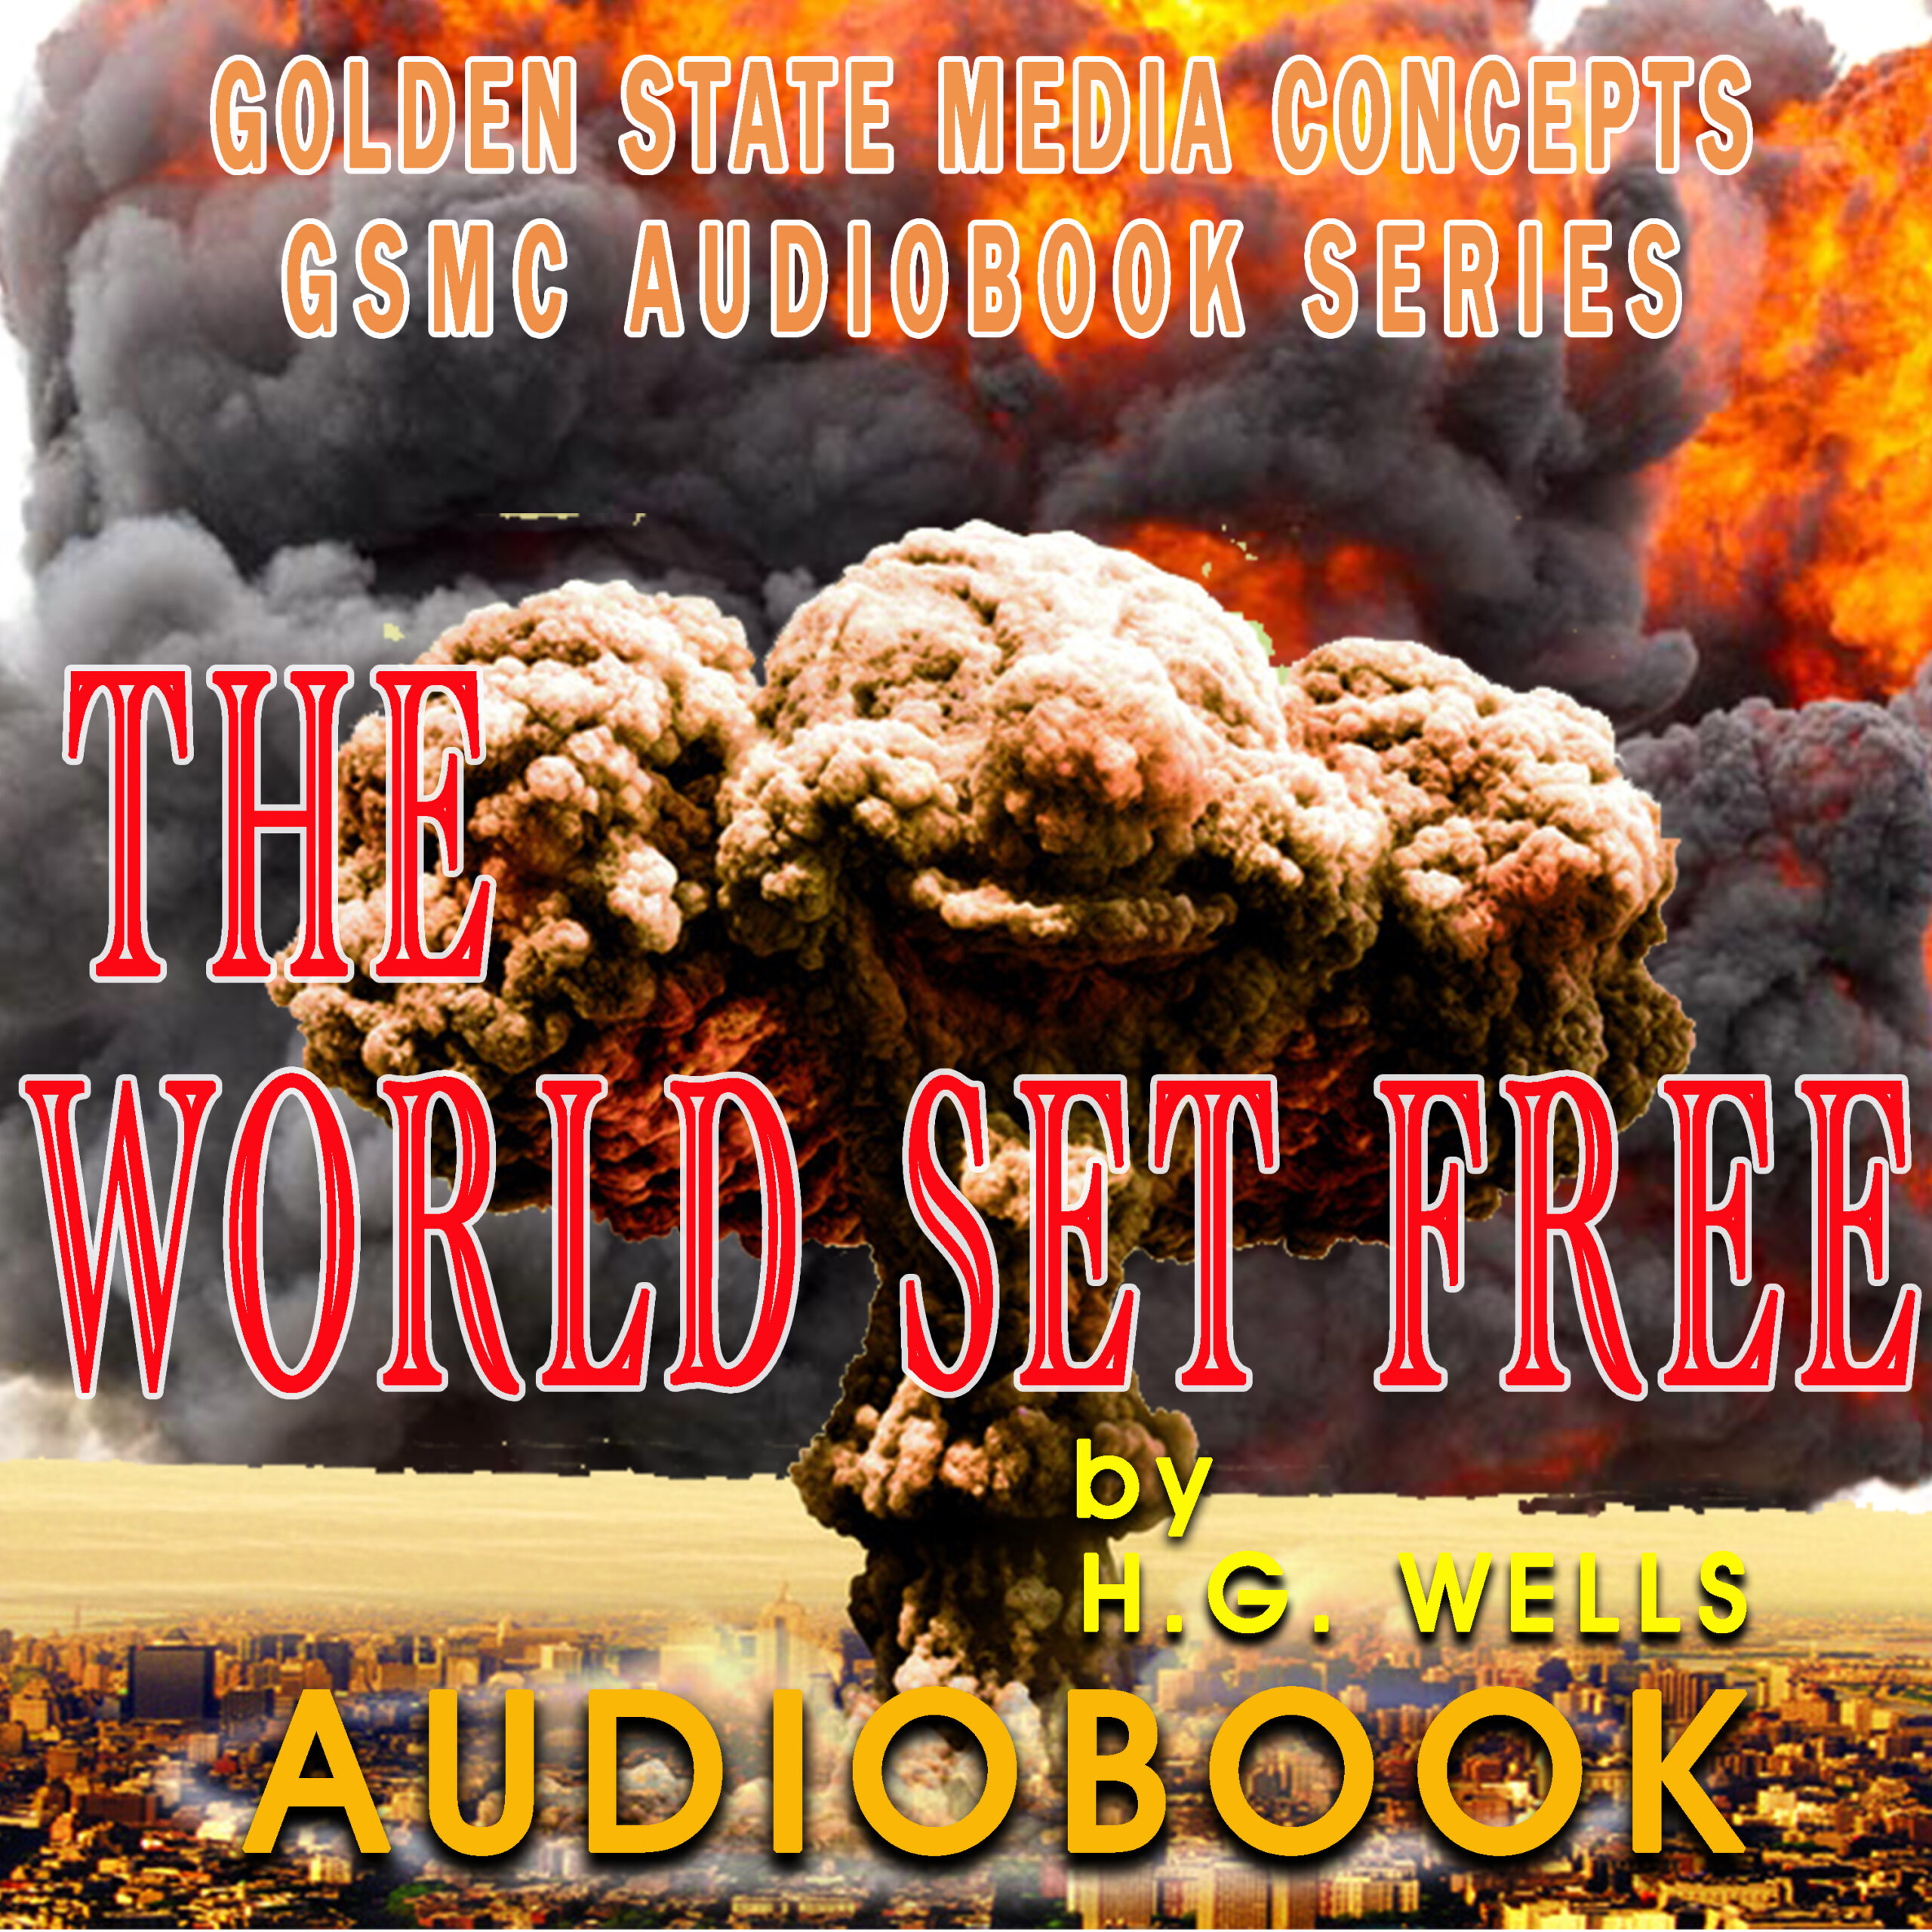 GSMC Audiobook Series: The World Set Free by H.G. Wells